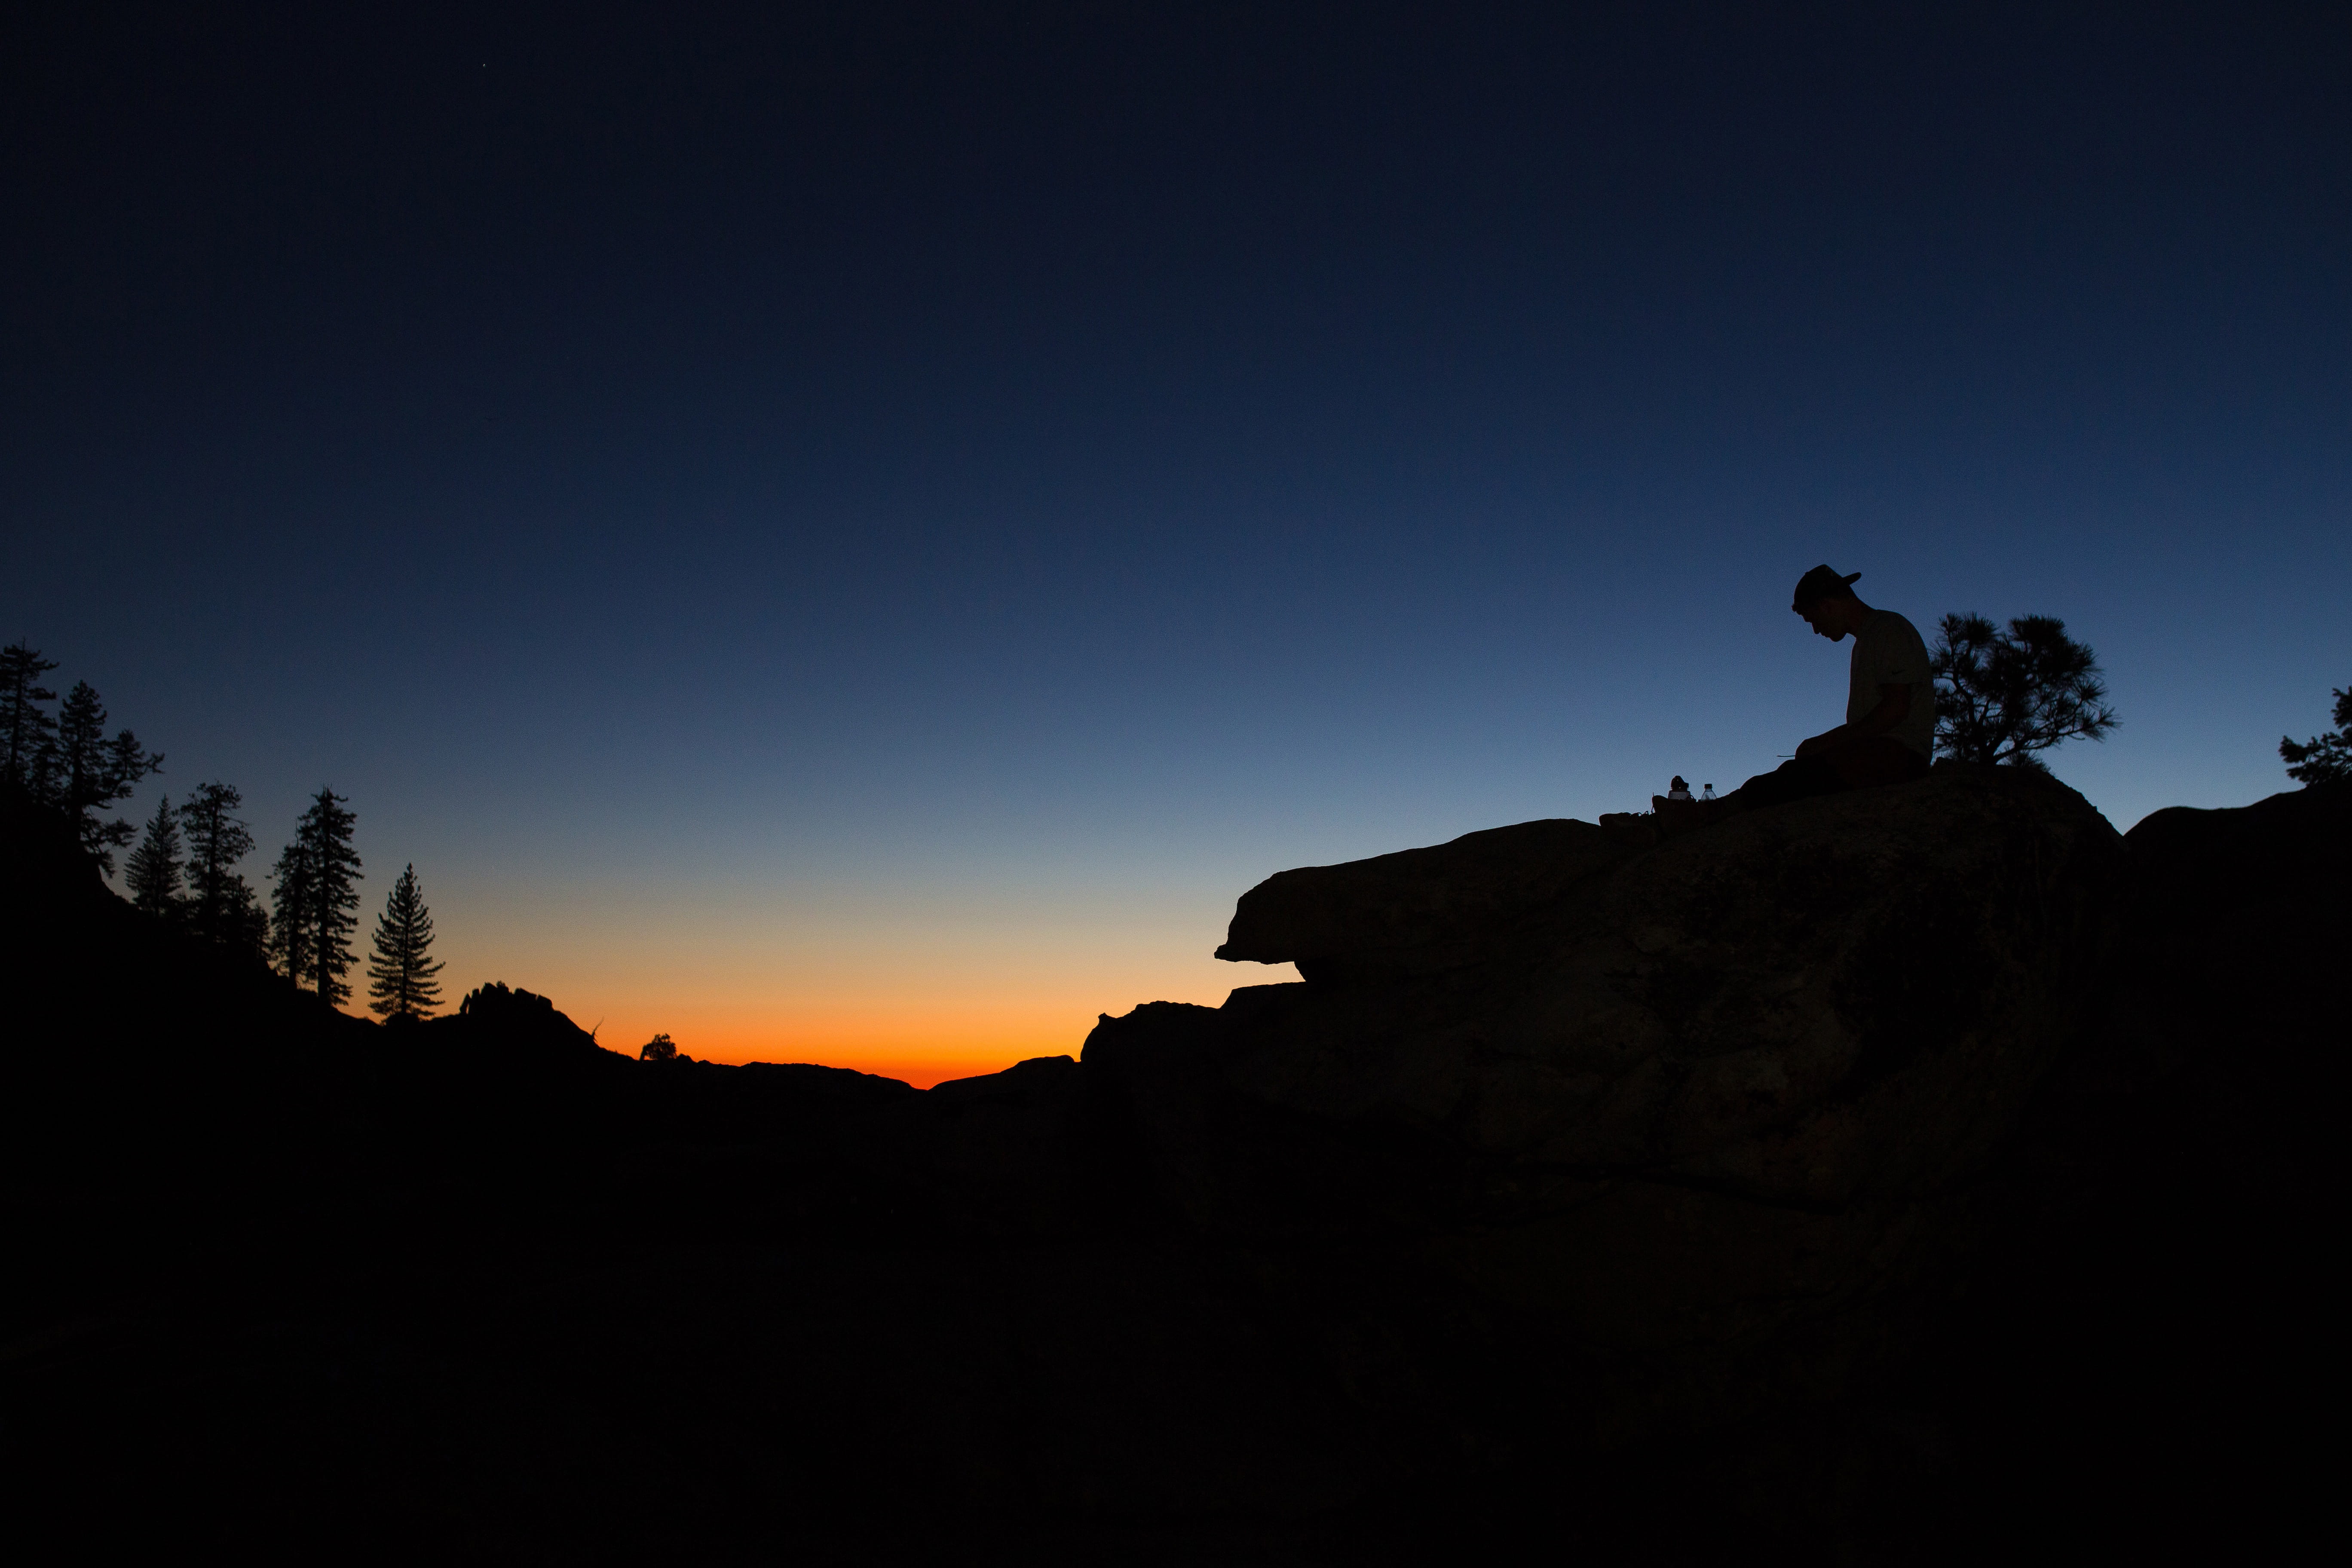 Silhouette of a man sitting on a rock at sunset in Yosemite Valley, USA